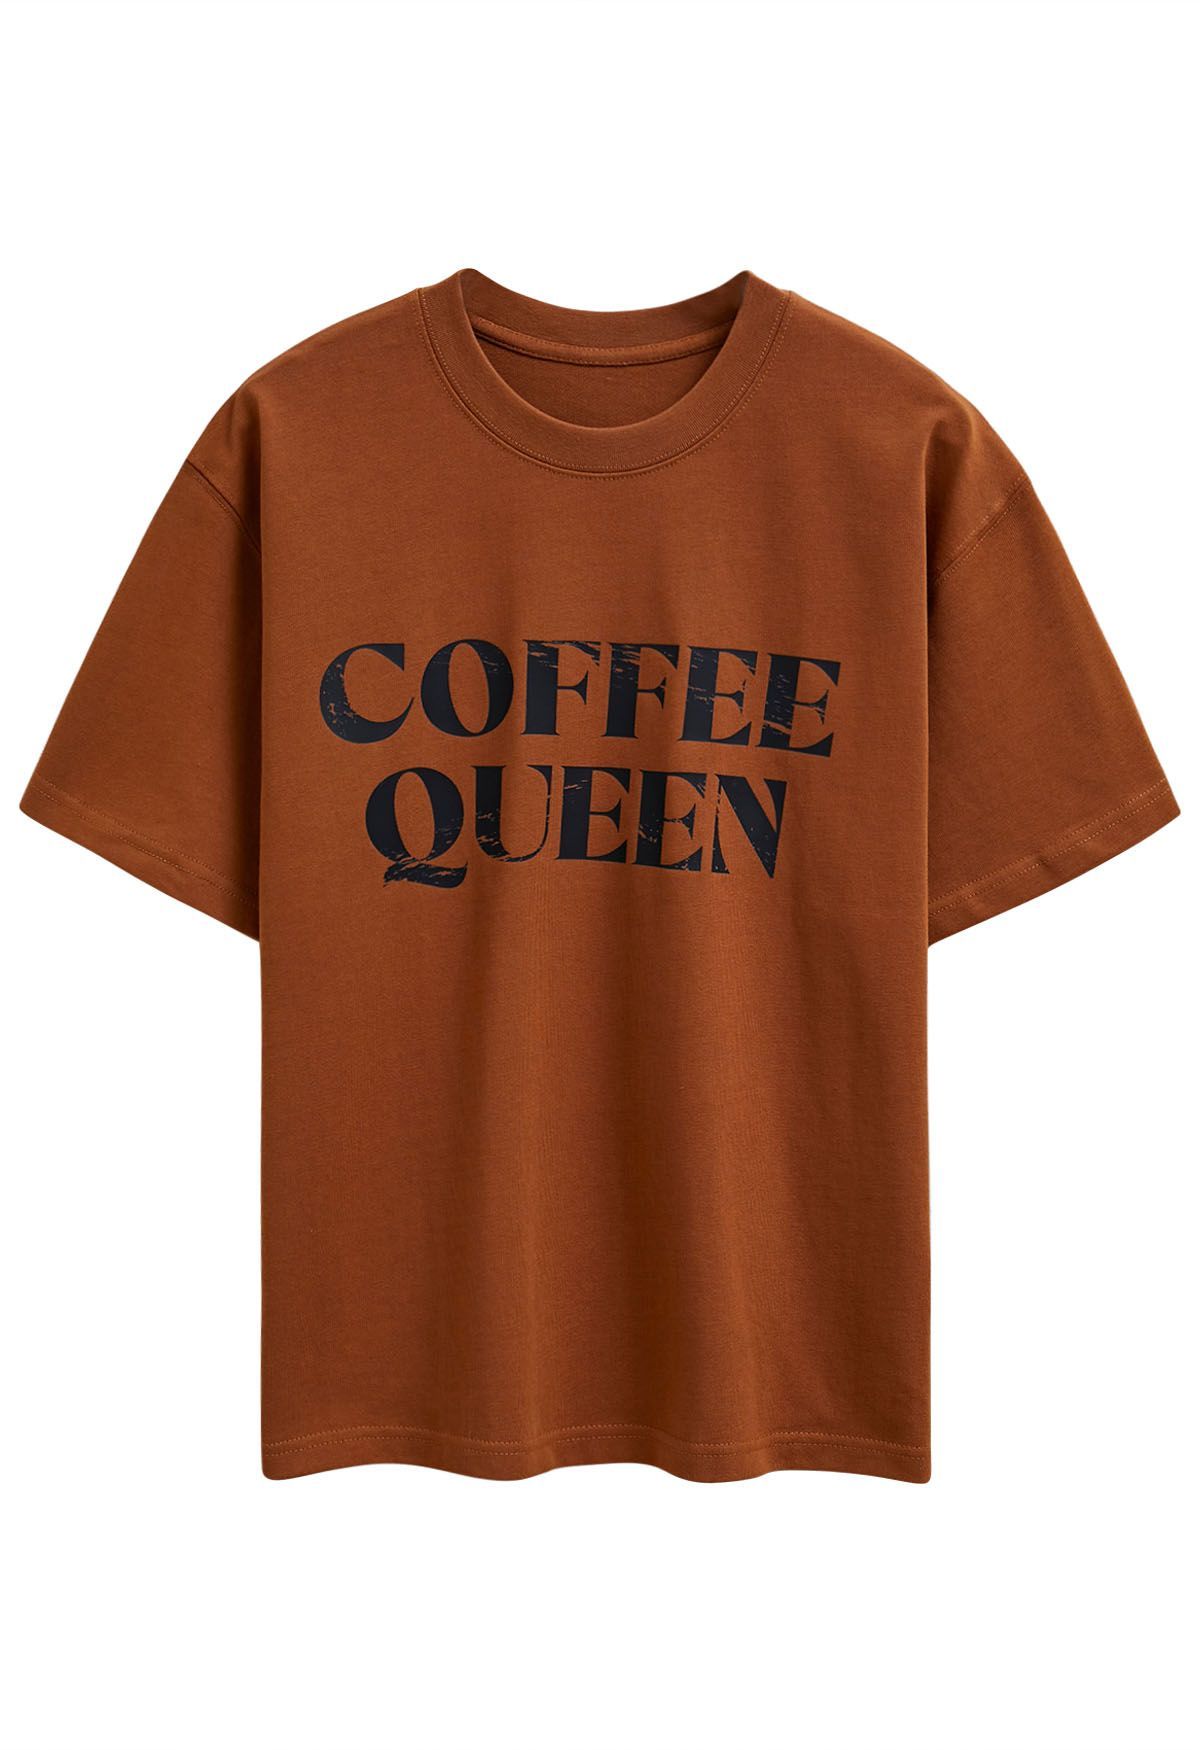 Coffee Queen Printed Cotton T-Shirt in Caramel | Chicwish